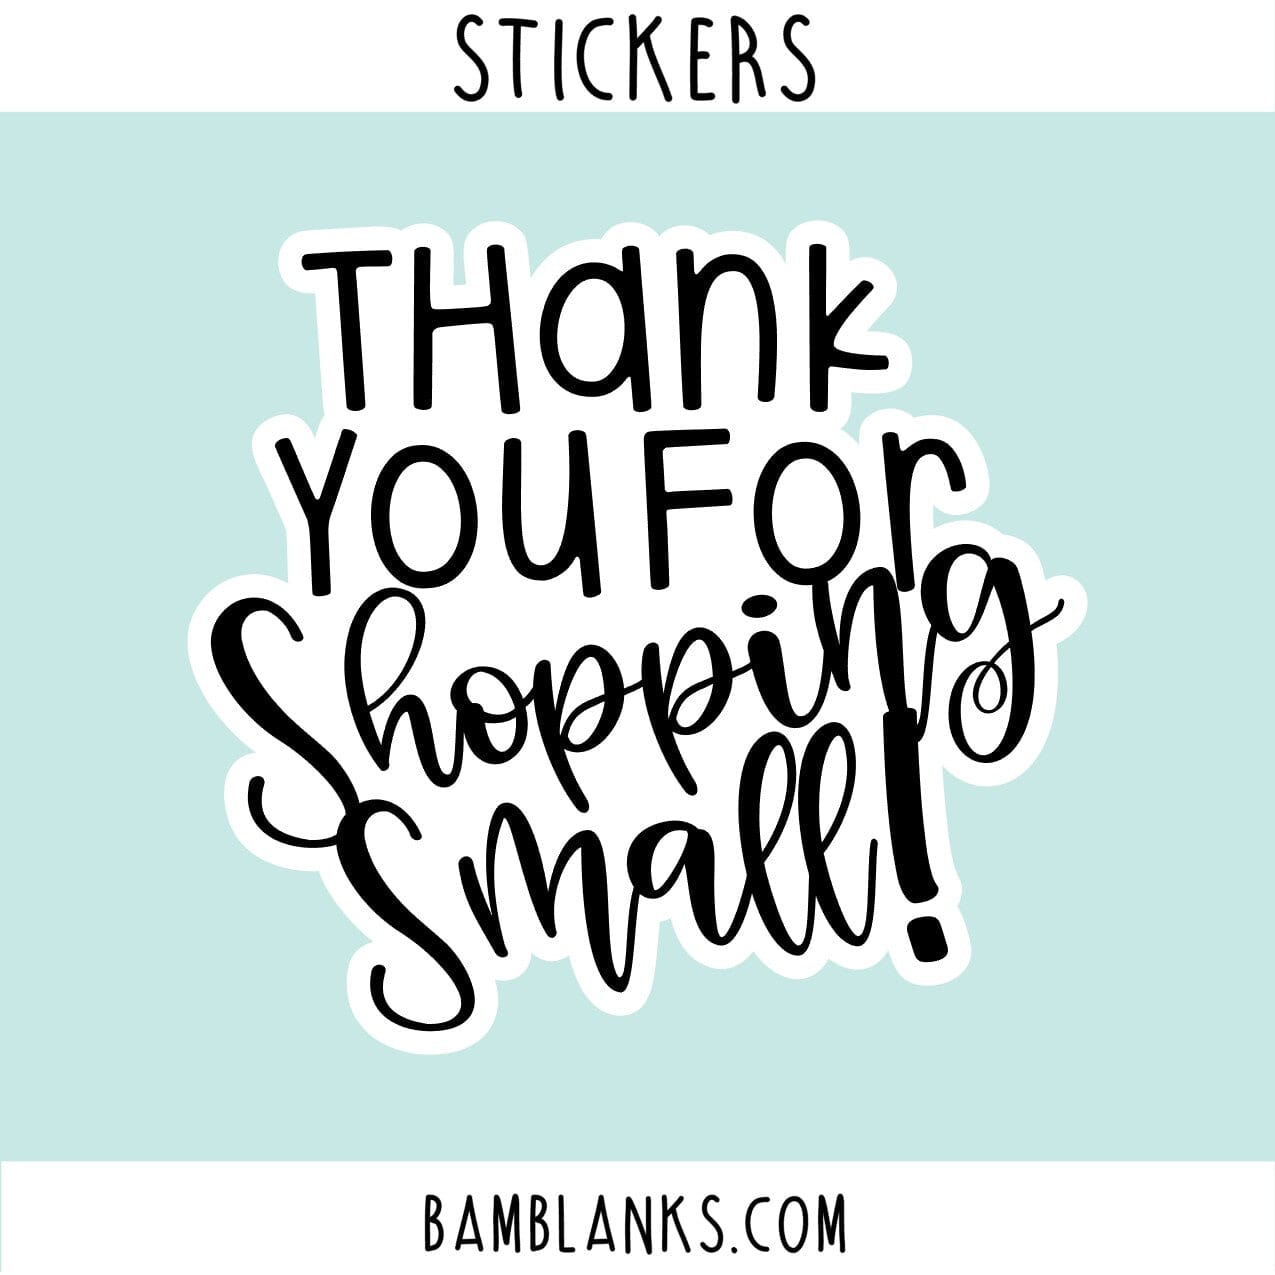 Thank You For Shopping Small #PS001